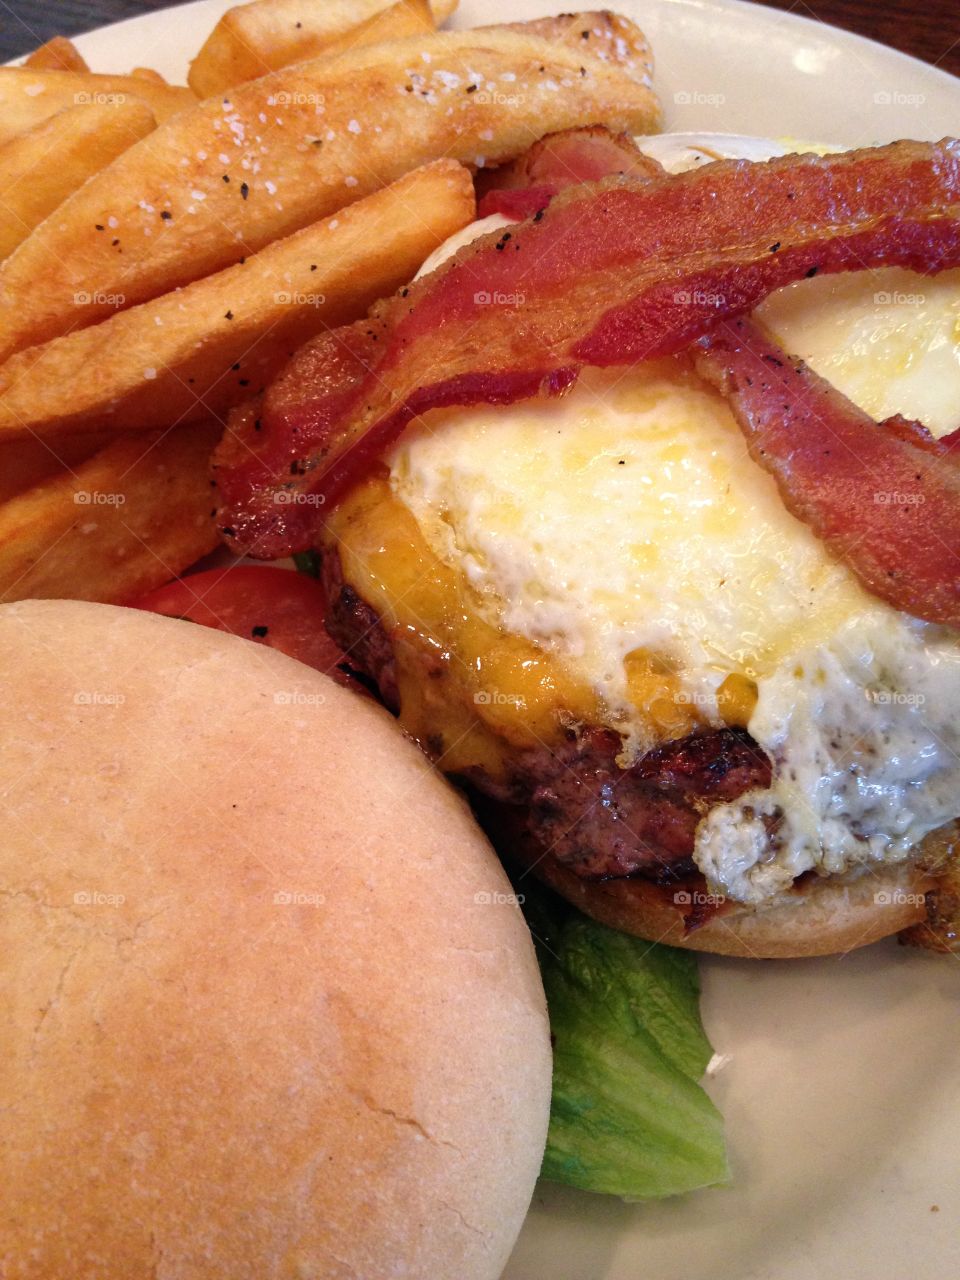 Steakburger . Cheeseburger with bacon and egg. 